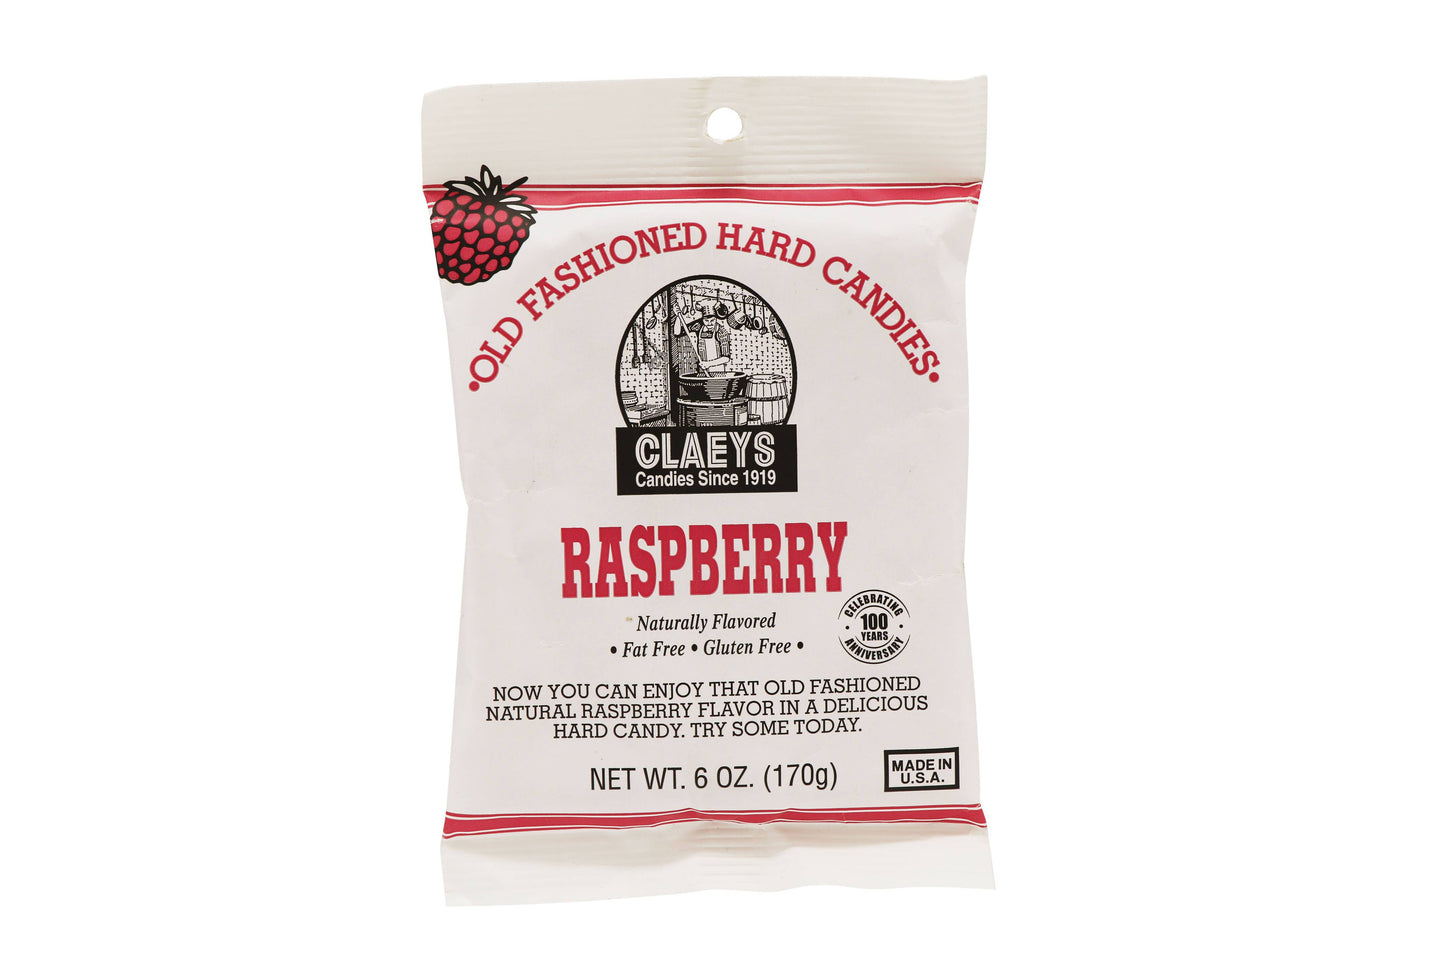 Old Fashioned Hard Candies In Raspberry